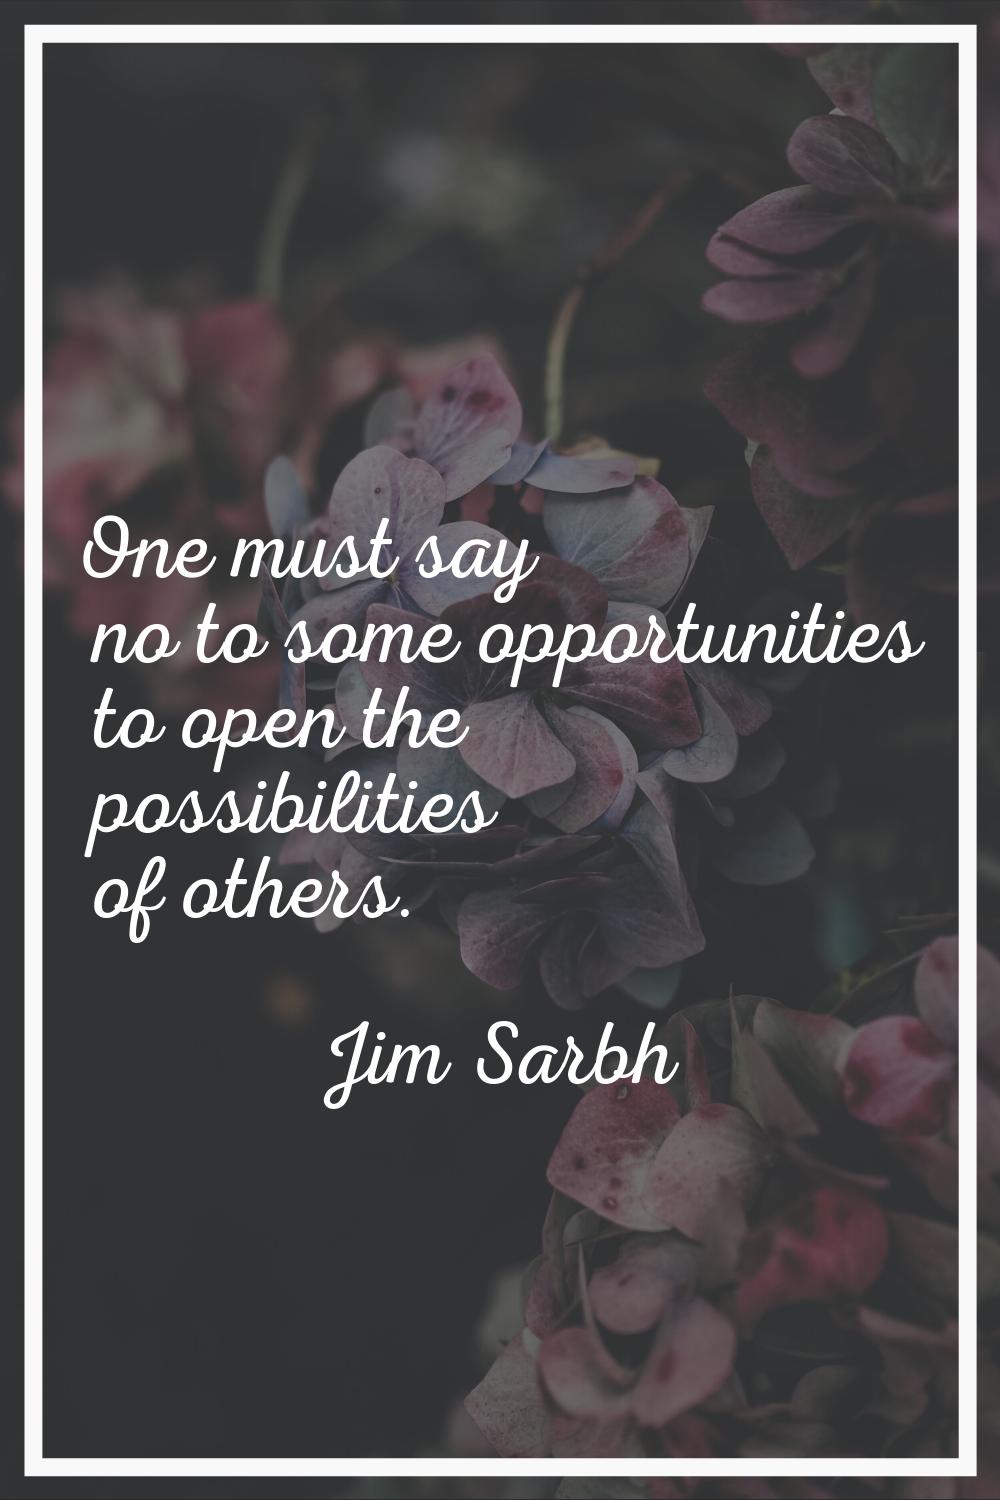 One must say no to some opportunities to open the possibilities of others.